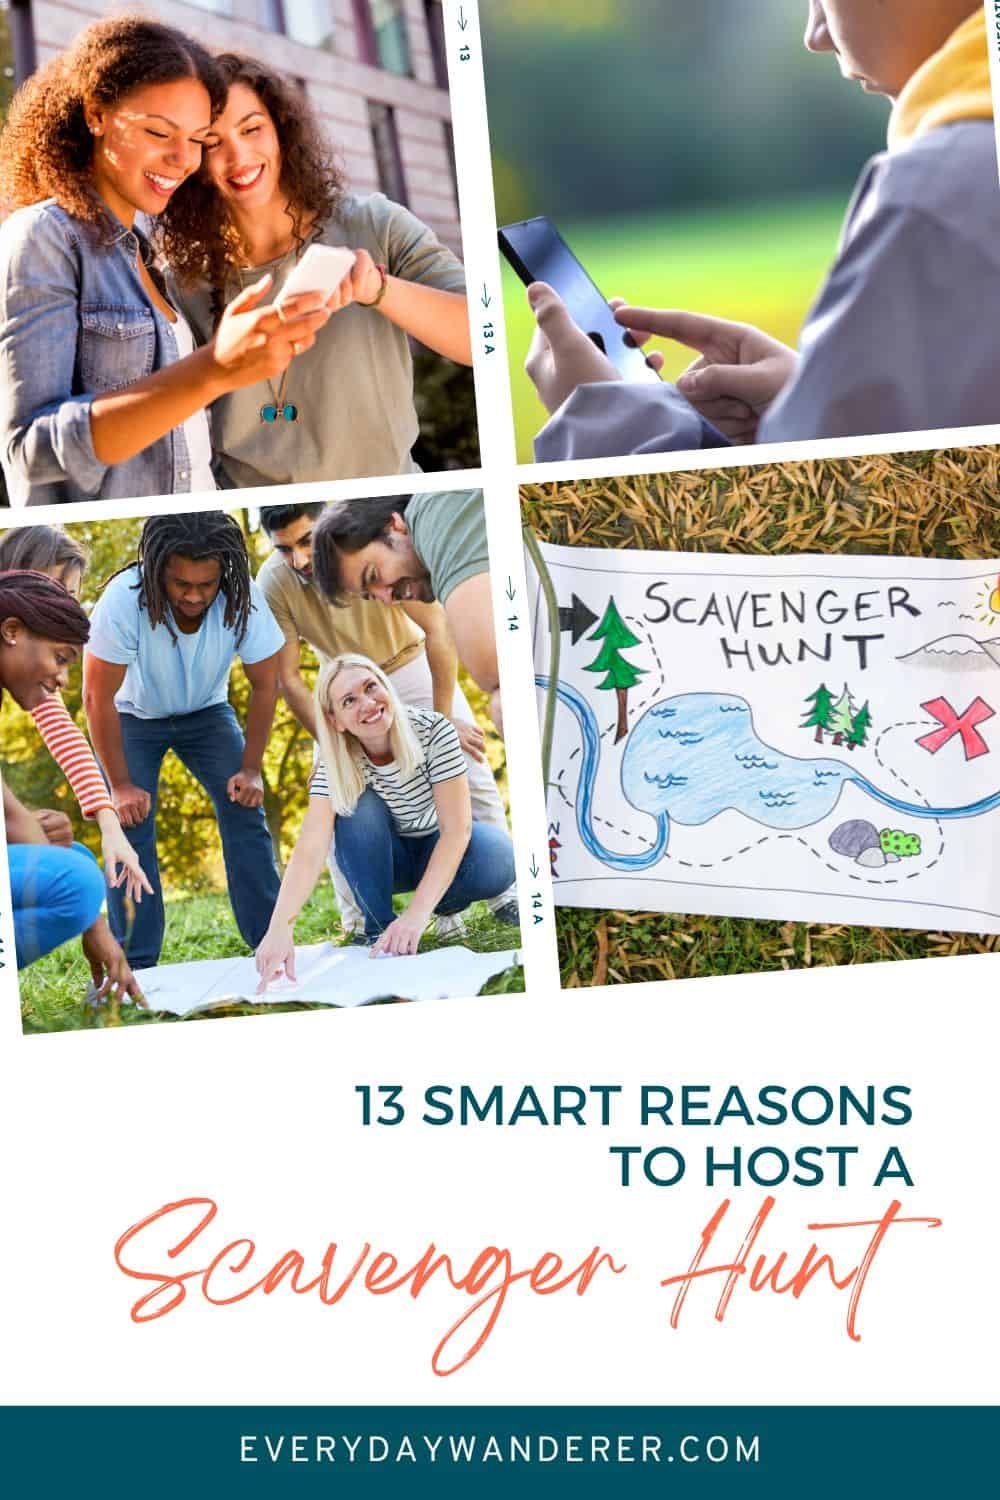 13 smart reasons to host a fun and engaging scavenger hunt event.